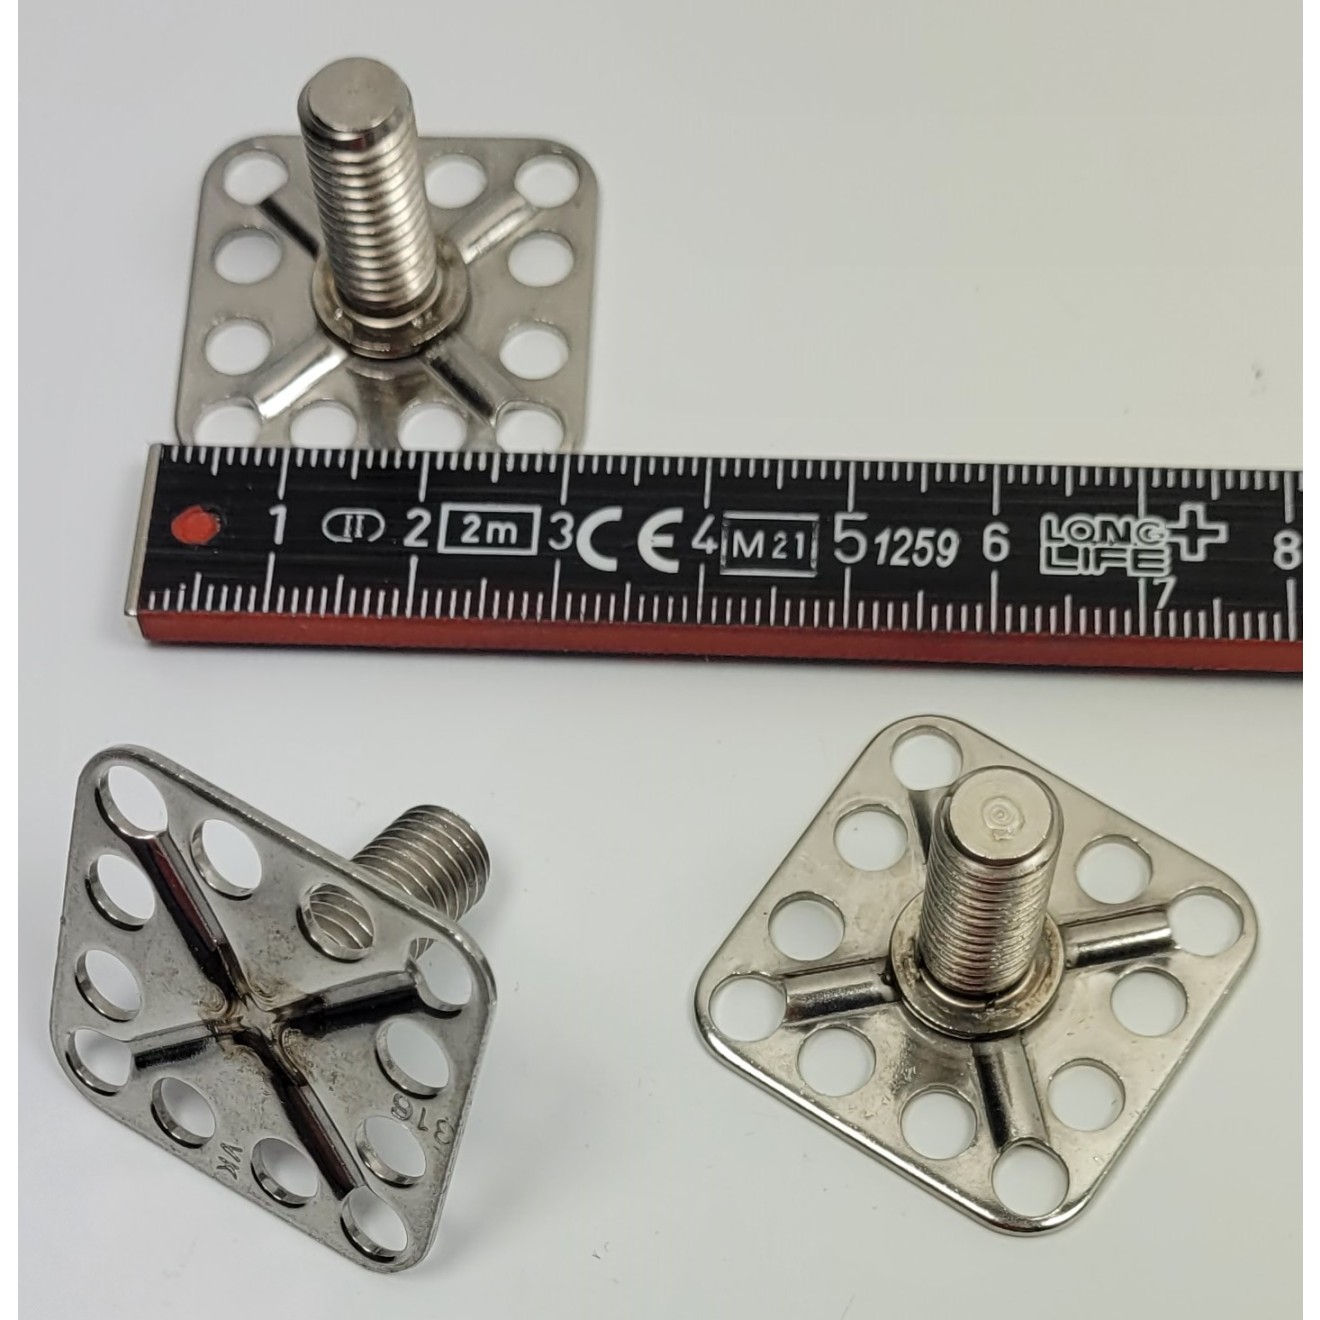 Stainless steel fasteners, male threaded stud M8x20, base plate 30x30mm